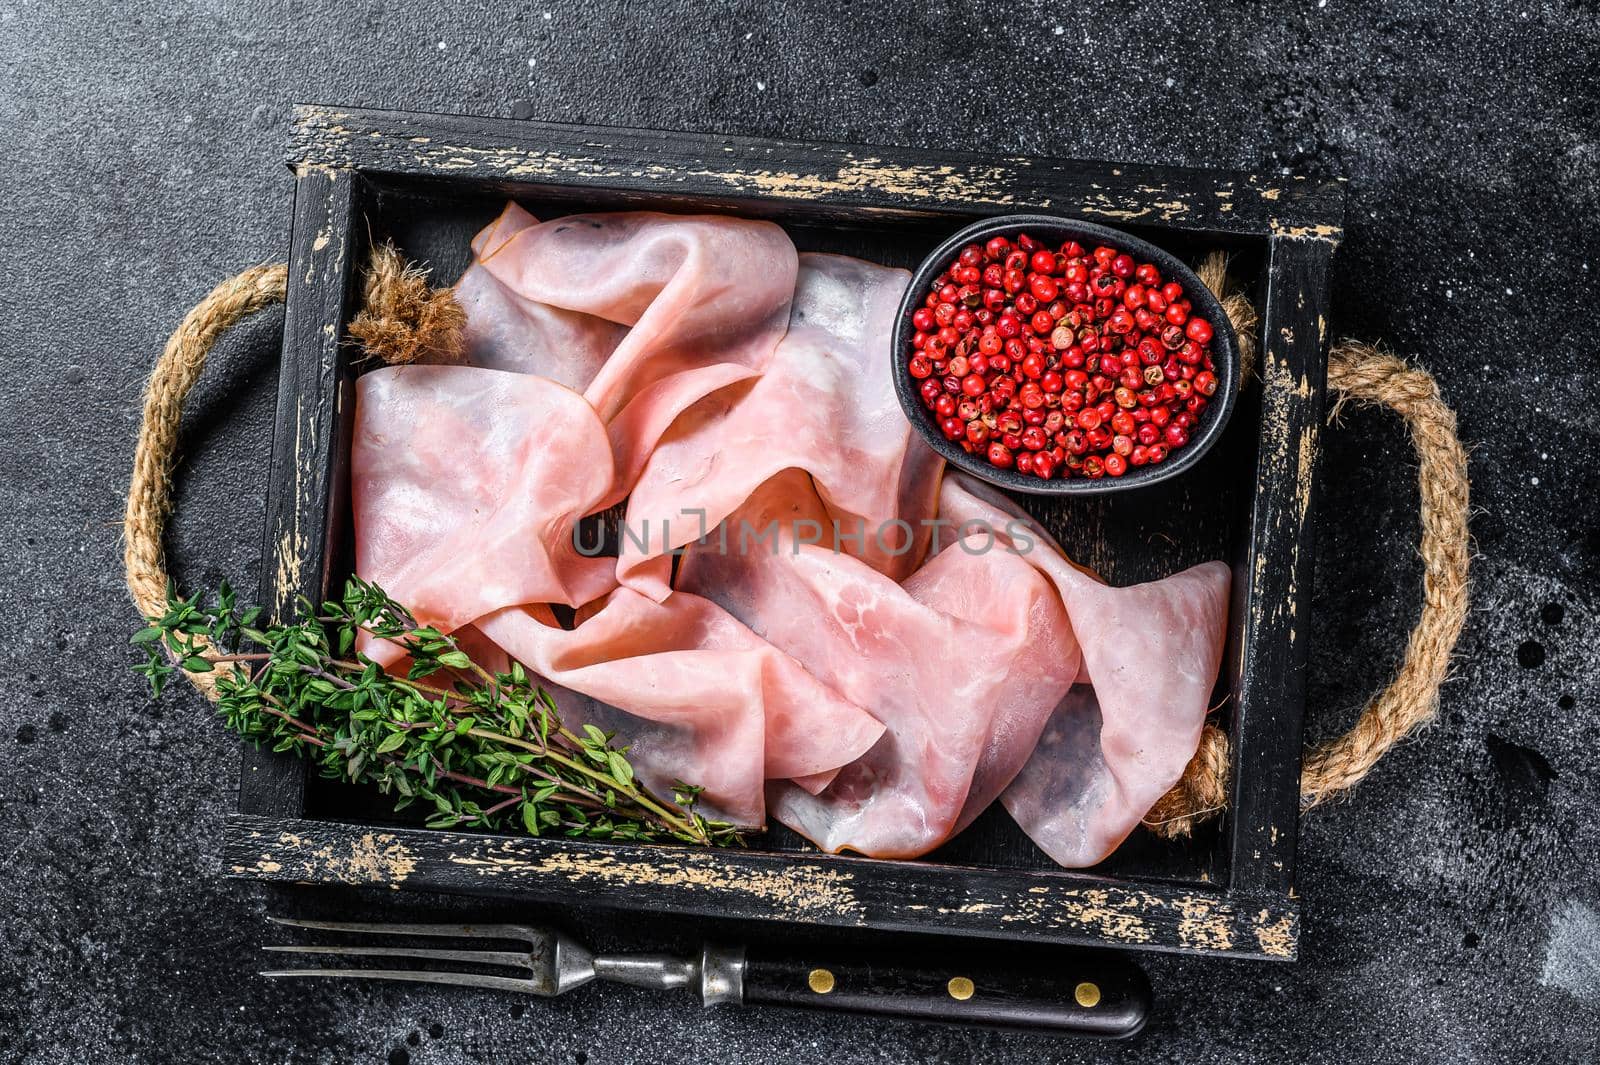 Thin sliced Smoked pork ham in wooden tray. Black background. Top view.